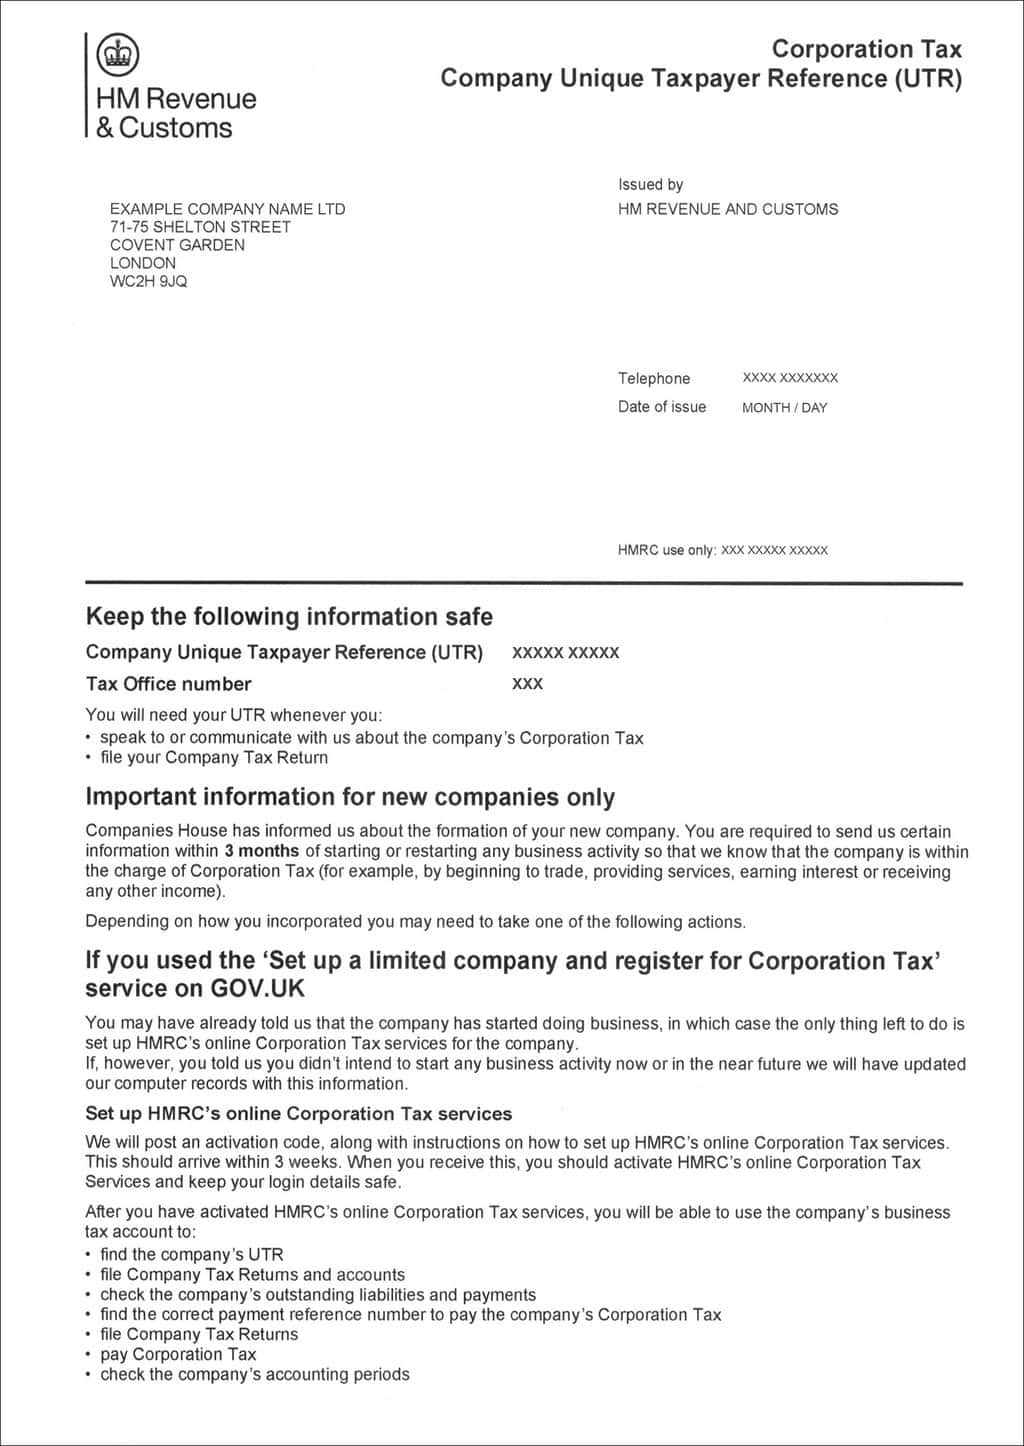 A screenshot of the first page of HMRC's first letter to a company